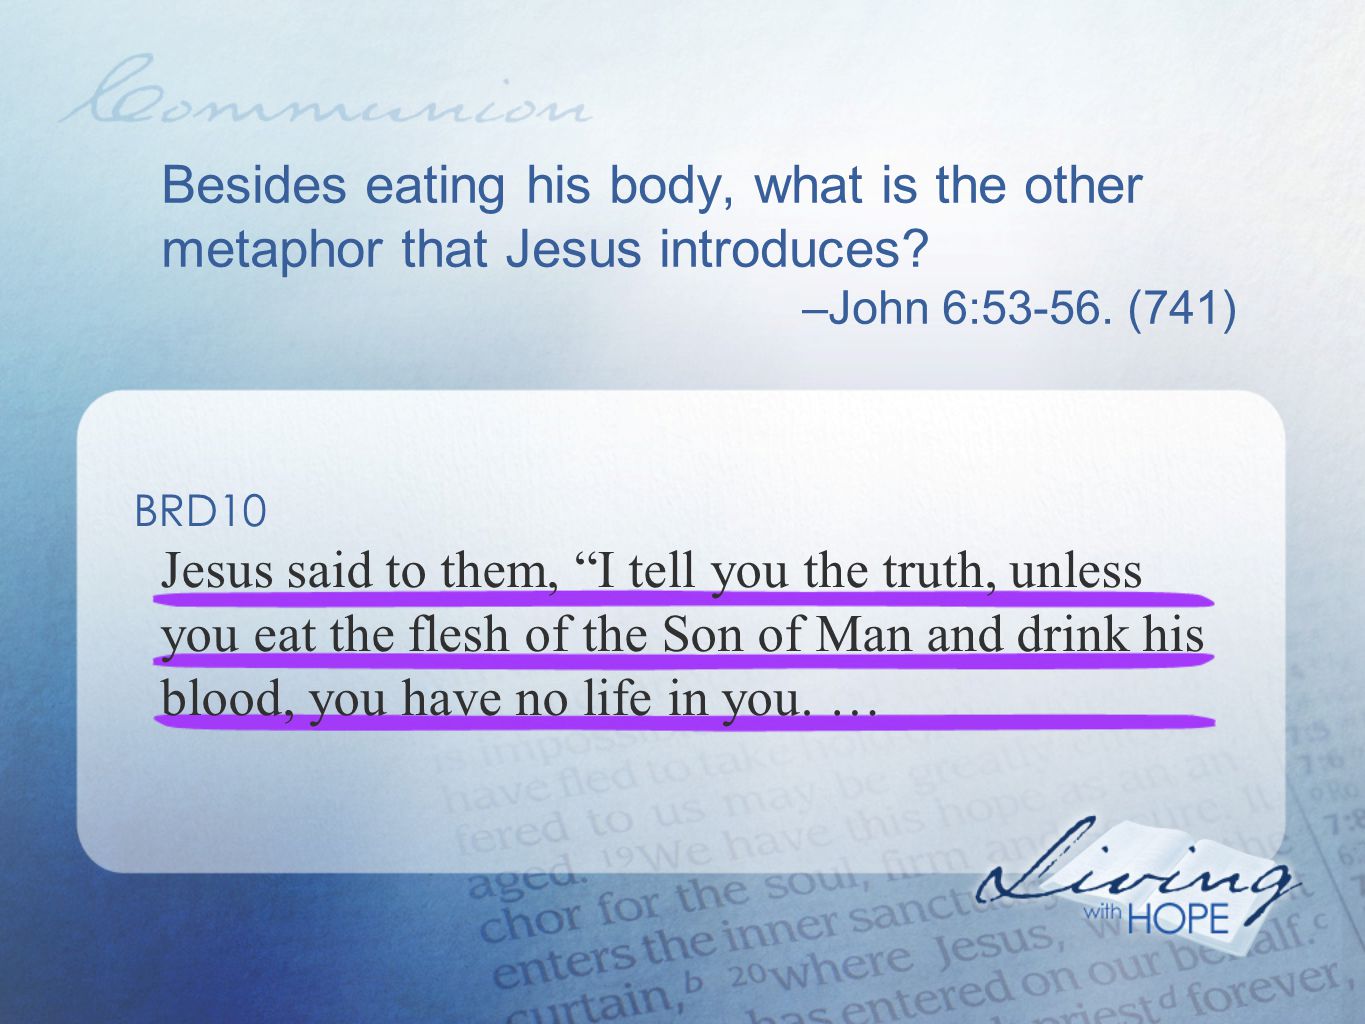 Besides eating his body, what is the other metaphor that Jesus introduces